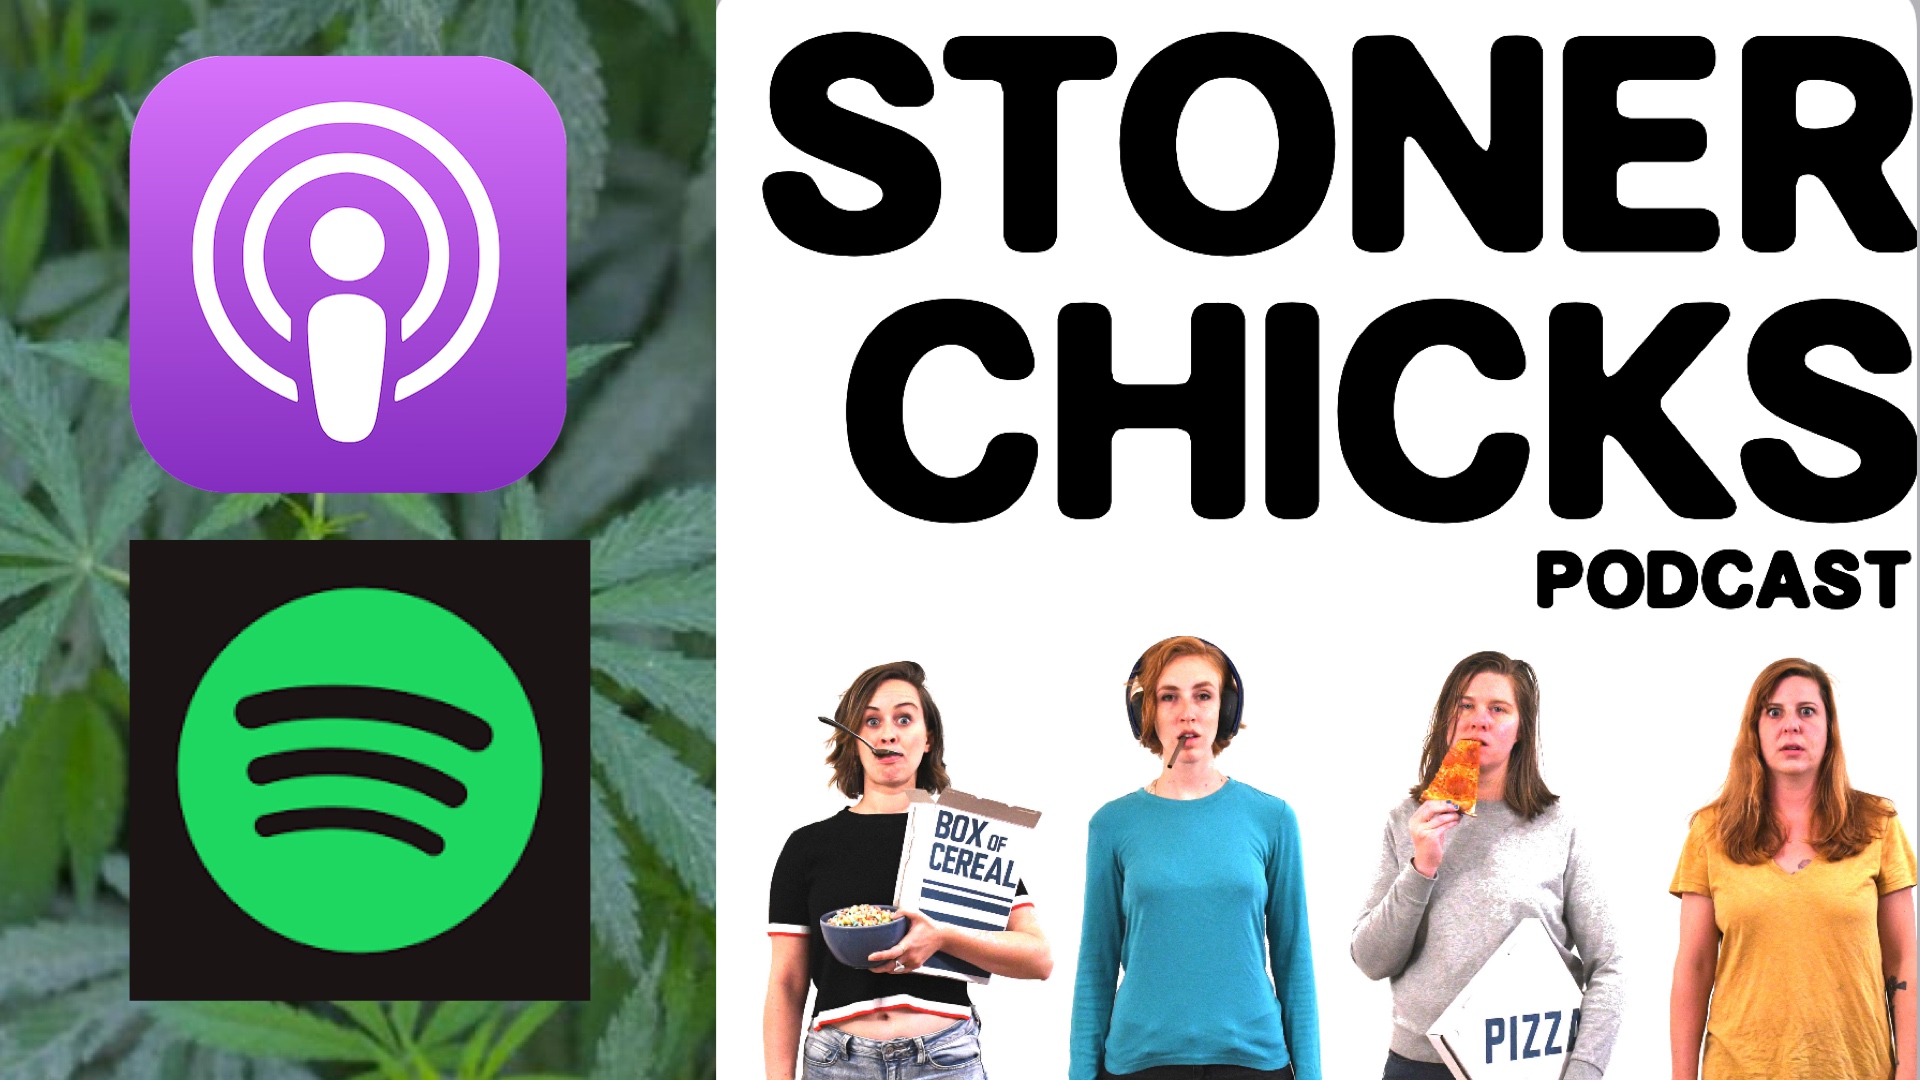 Seattle Comedy Group Launches The Stoner Chicks Podcast